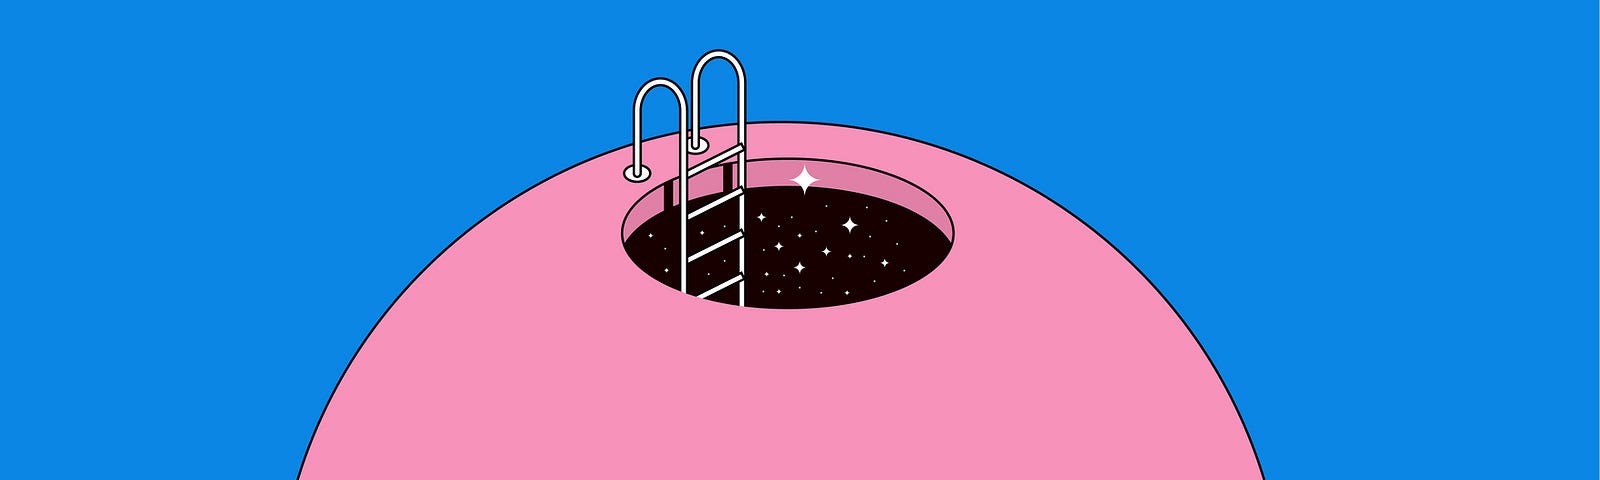 Illustration of a swimming pool ladder going down into the galaxy of a pink person’s mind.